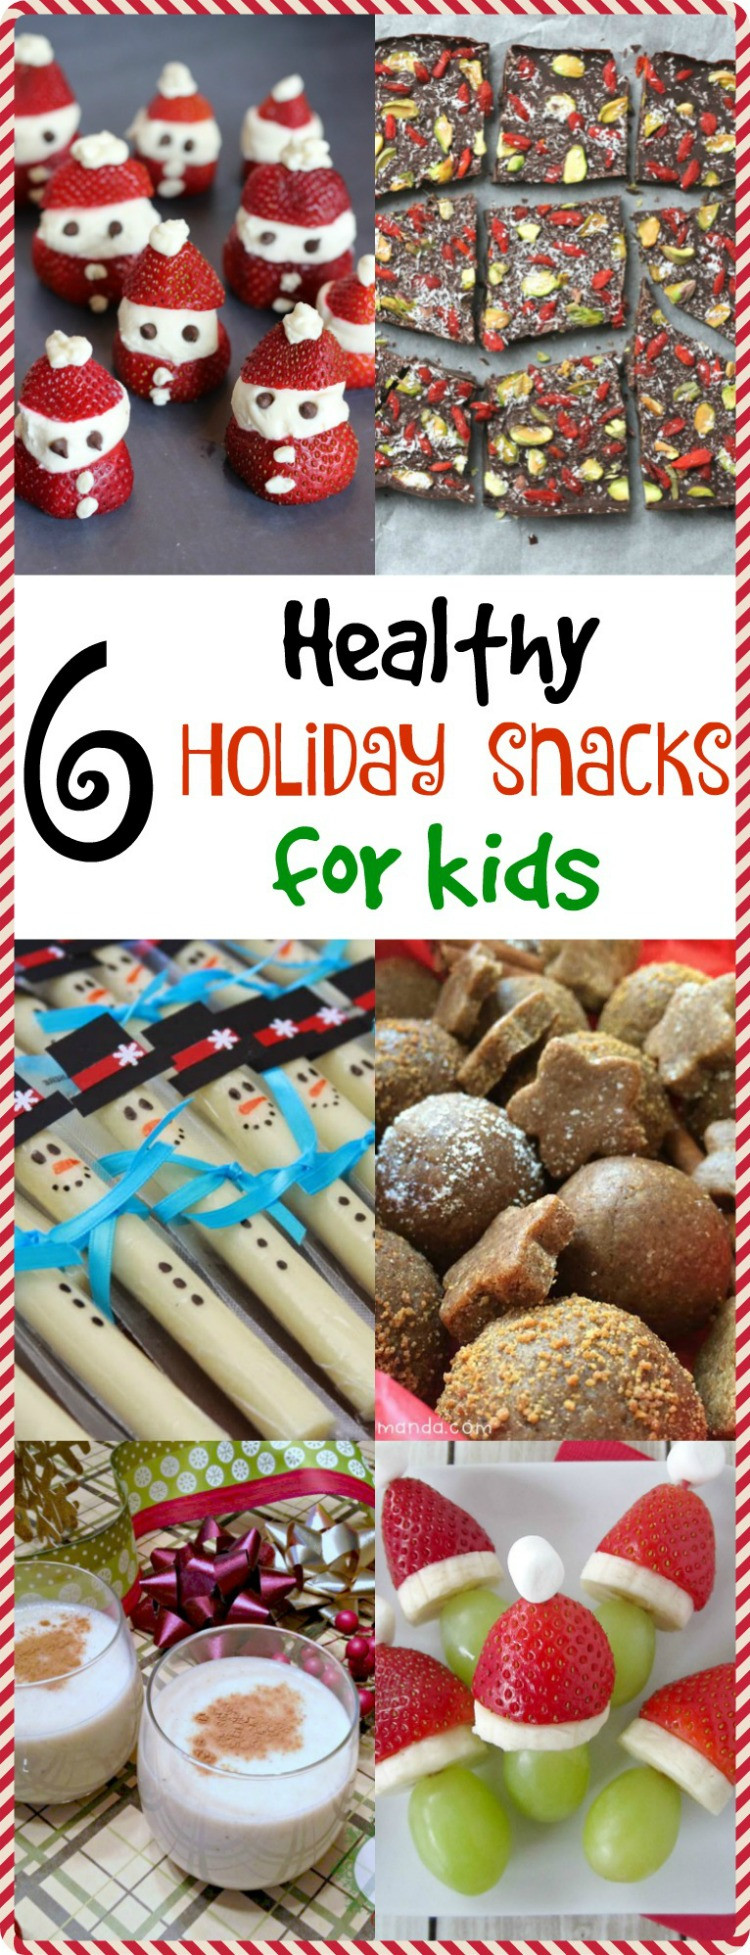 Healthy Christmas Snacks
 6 Healthy Holiday Snacks for Kids MOMables